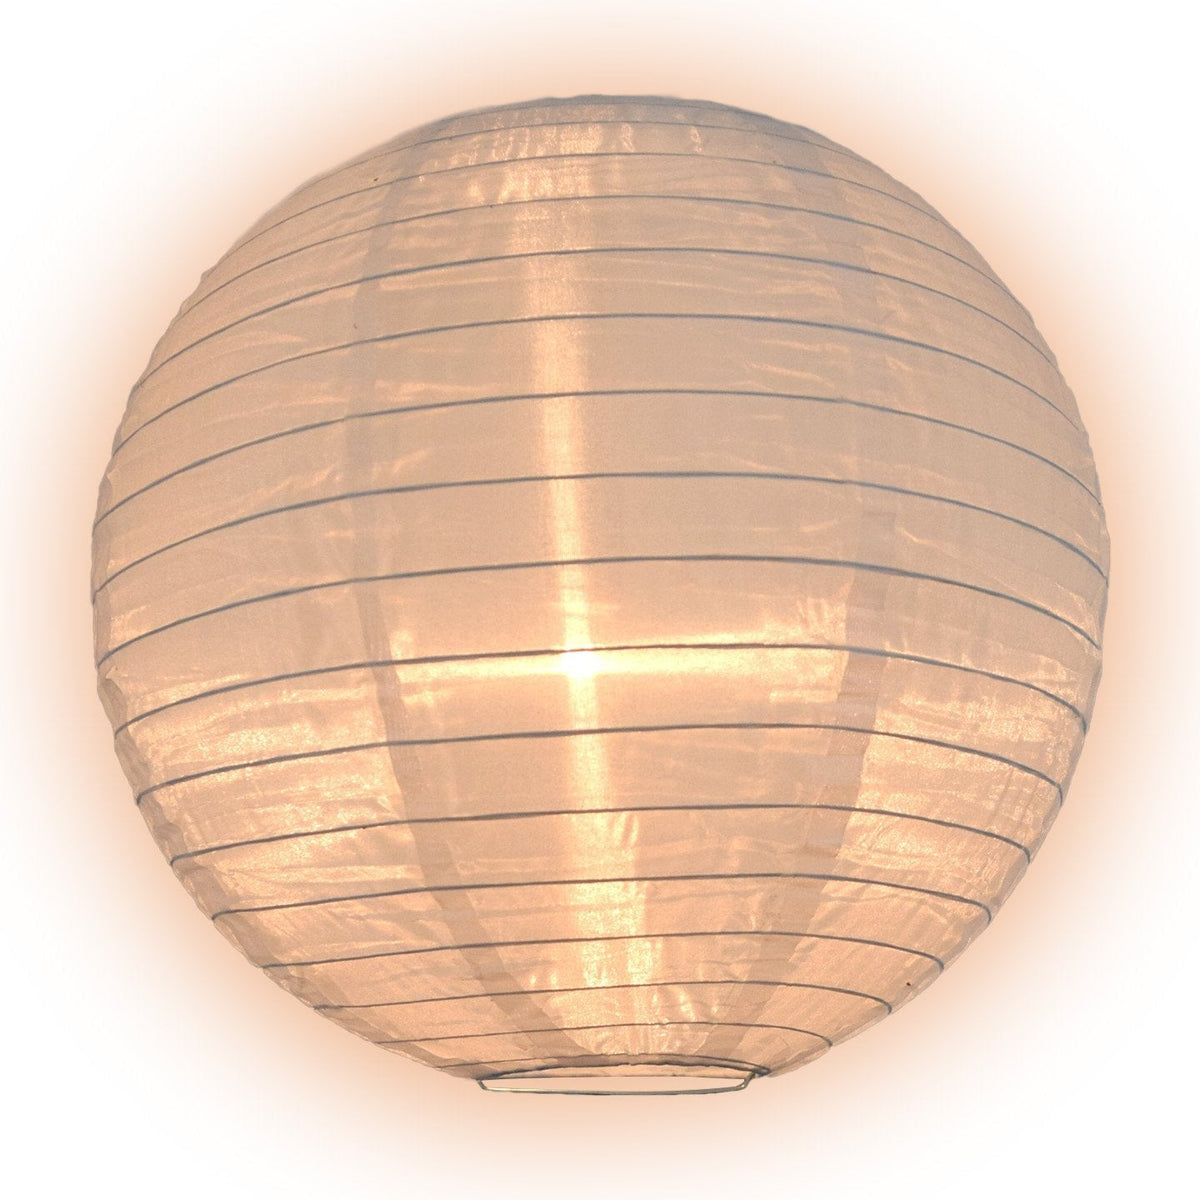 42" Shimmering Even Ribbing Nylon Lanterns - Door-2-Door - Various Colors Available (6-Pieces Master Case, 60-Day Processing)